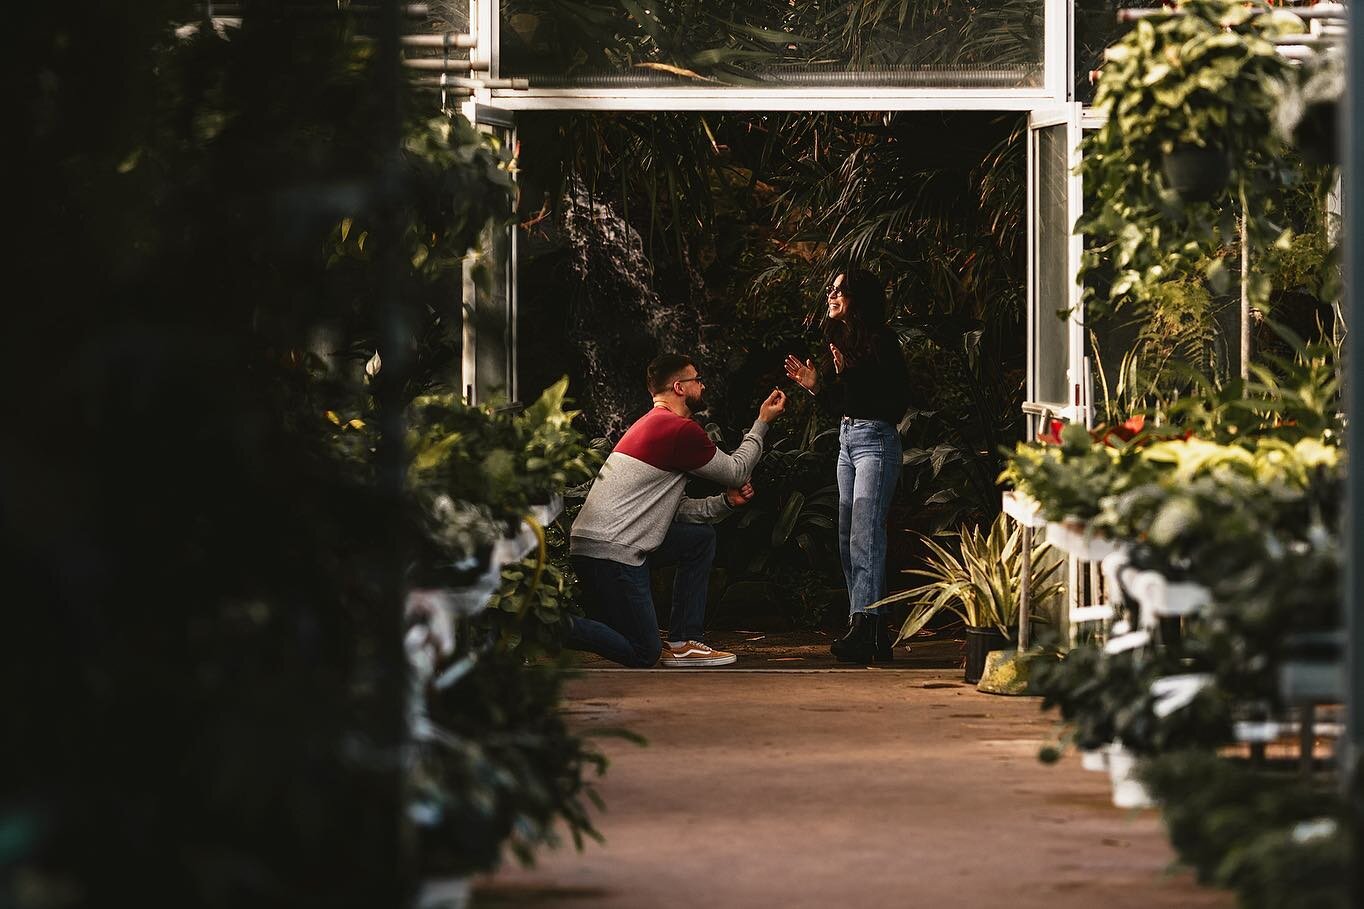 Congratulations to Natalie &amp; Max on their engagement! Ott&rsquo;s made for the perfect proposal backdrop 🪴
.
.
.
.

#lehighvalleyphotographer #wildhearts #portrait_society #muchlove_ig #wildhairandhappyhearts #createportraits #justalittleloveins